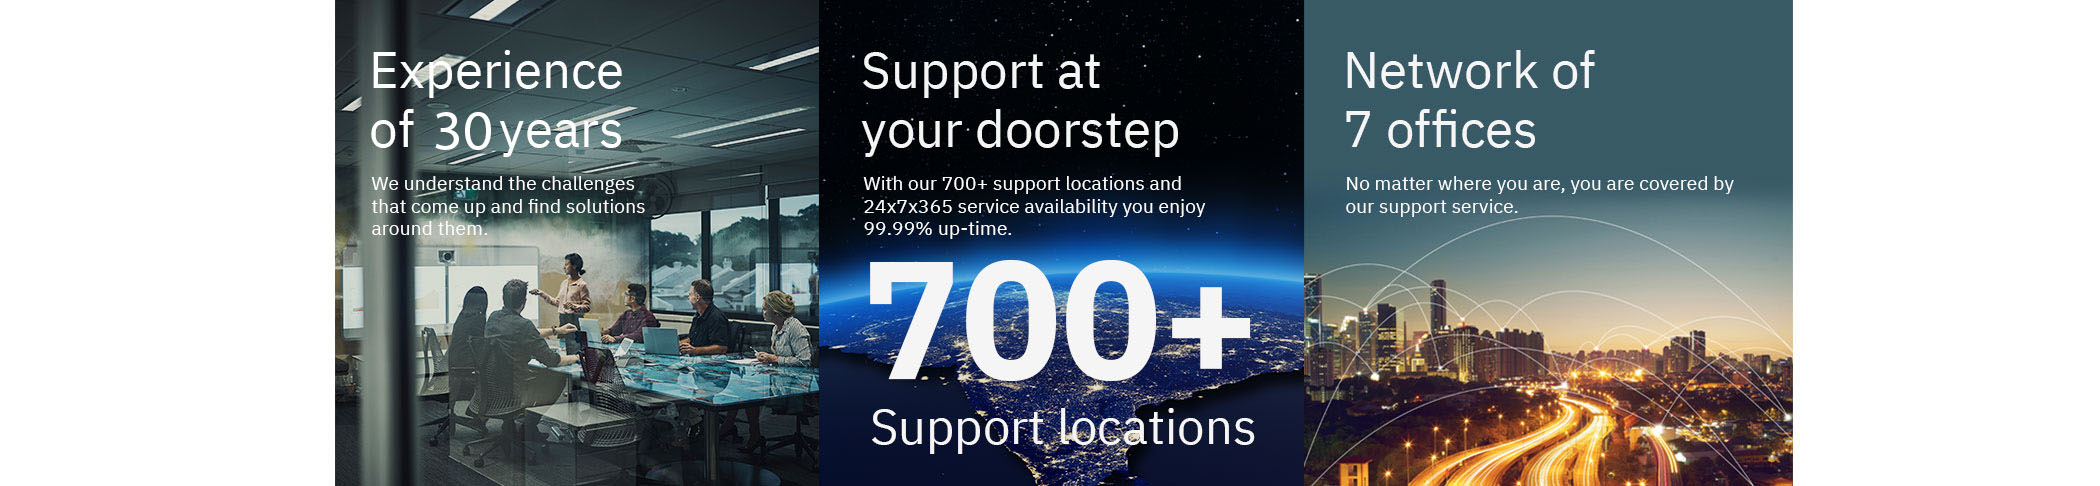 Experience of 30 Years, Support at 700 Locations